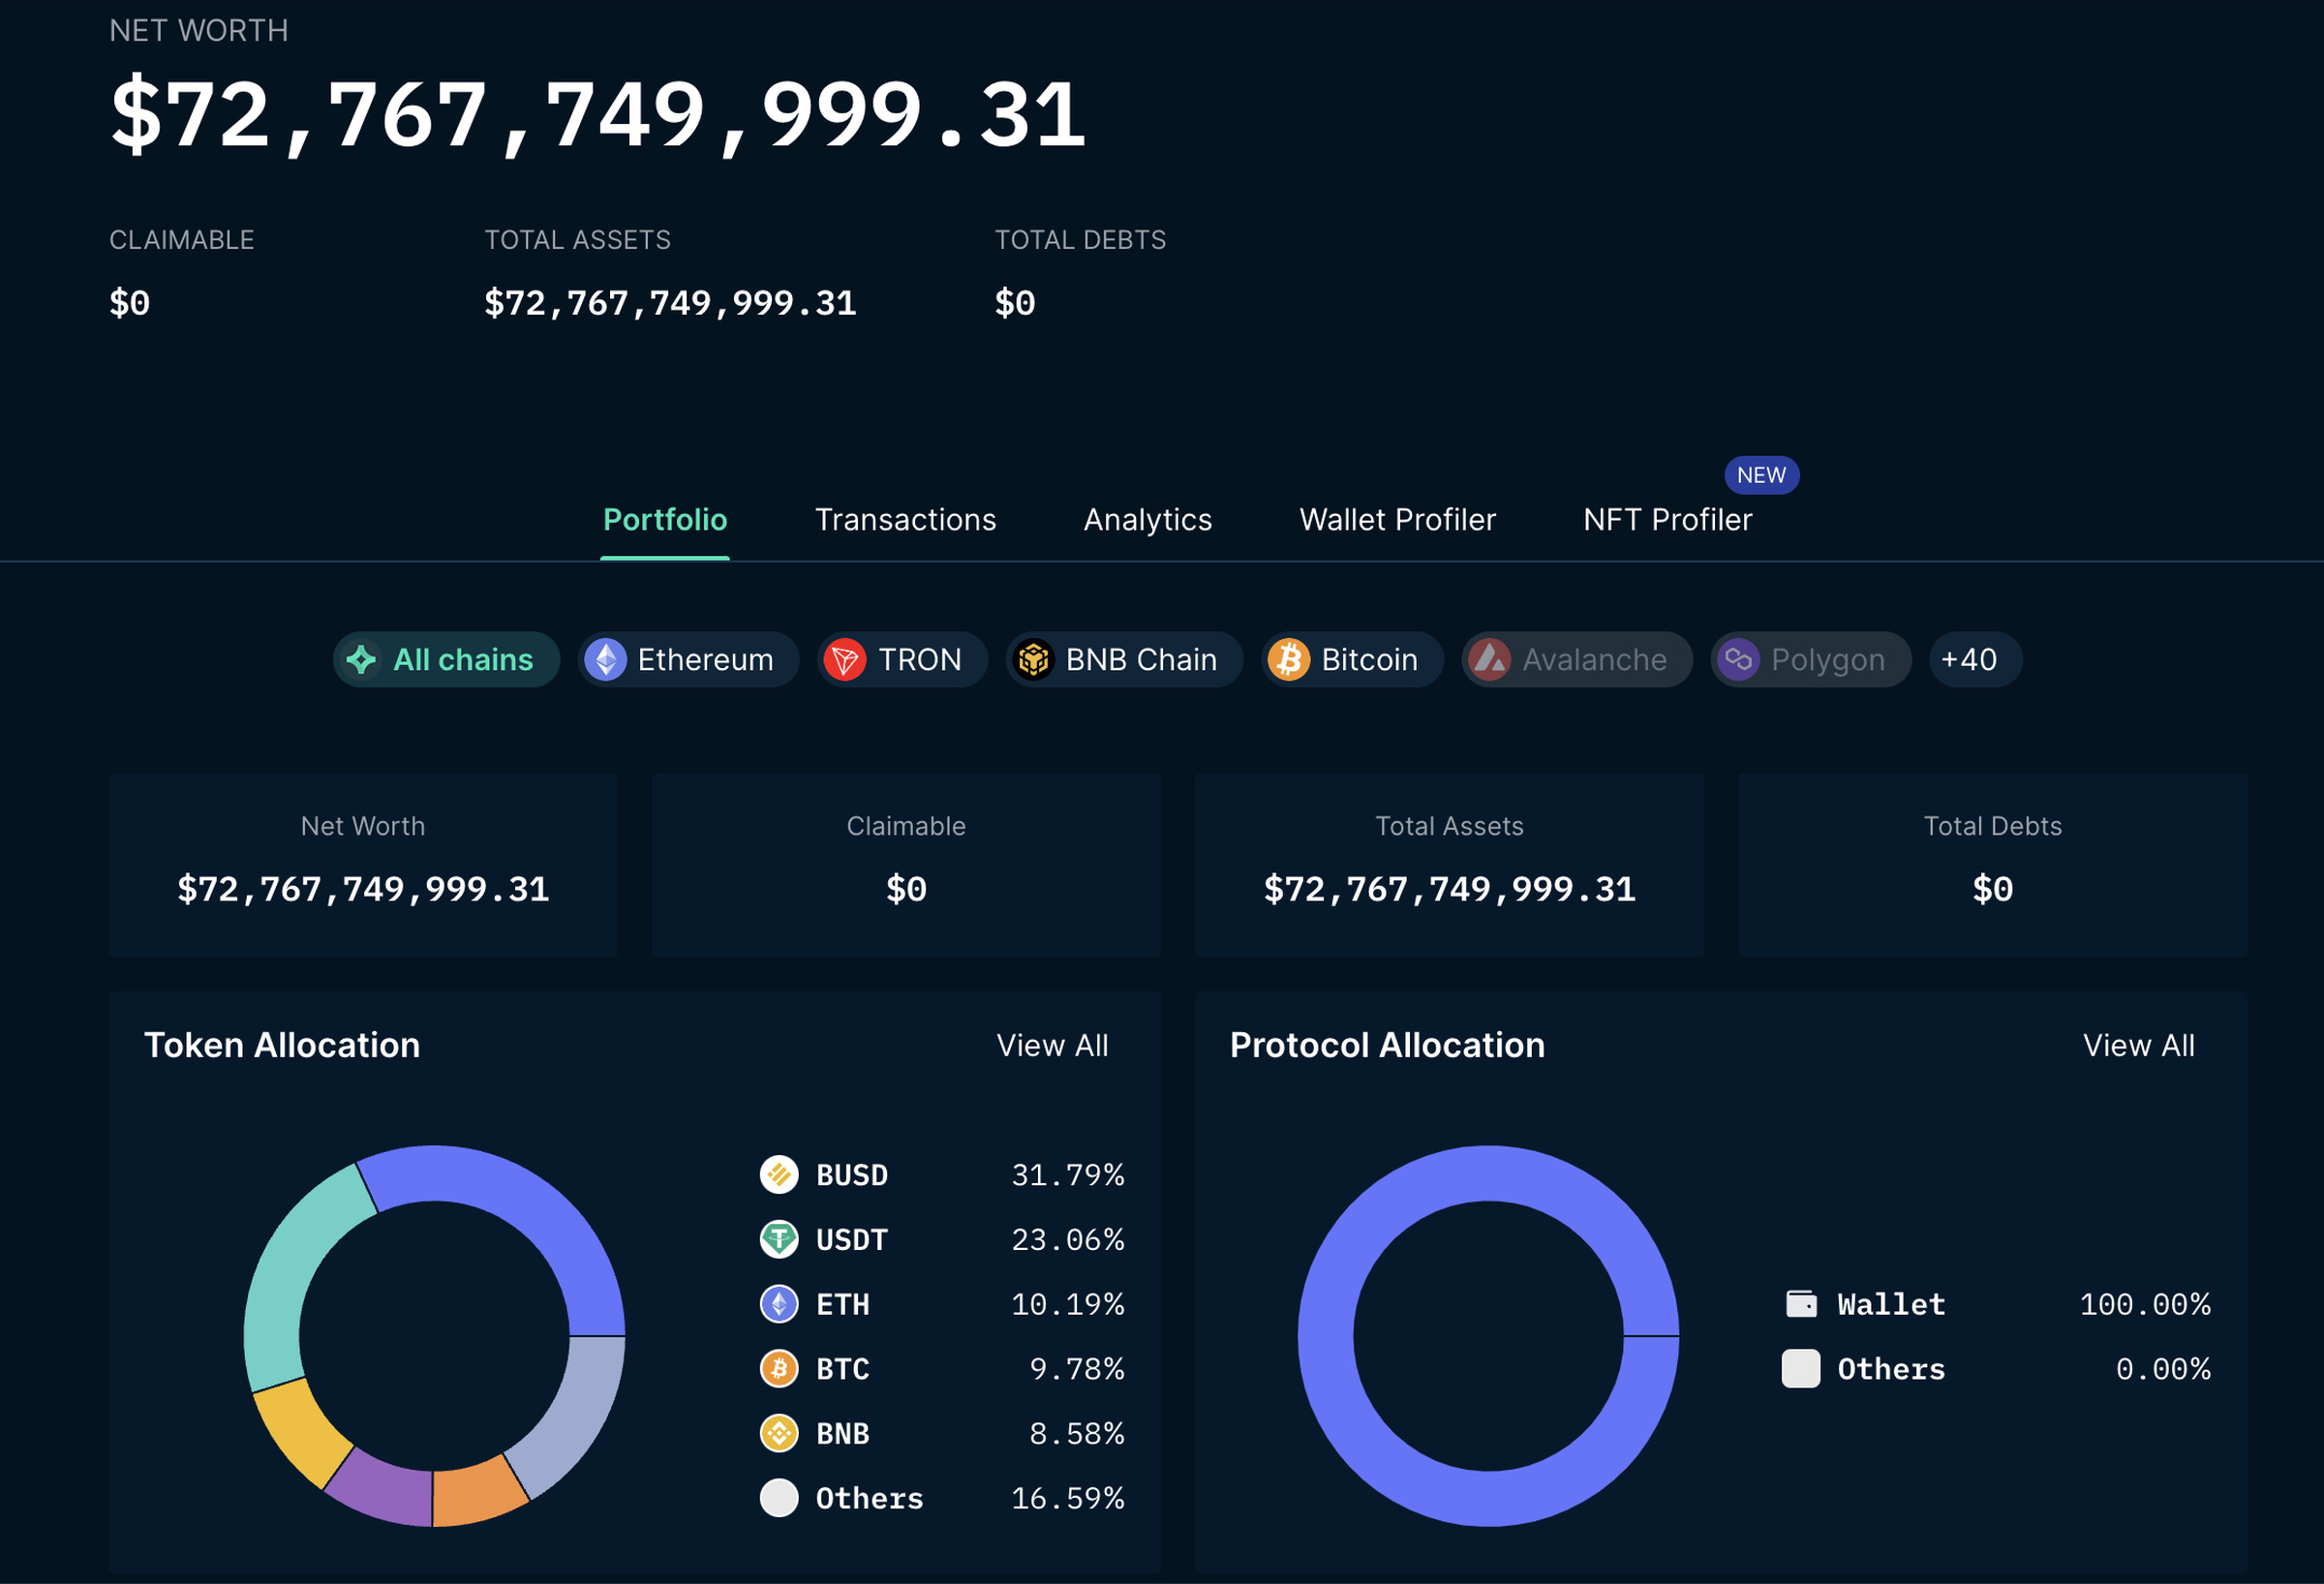 Screenshot of the Nansen dashboard for Binance, showing a total assets of $72,767,749,999.31. A section labeled “Token Allocation” shows that the company’s holdings are made up of 31.79 percent BUSD, 23.06 percent USDT, 10.19 percent ETH, 9.78 percent BTC, 8.58 percent BNB, and 16.59 percent “others.”